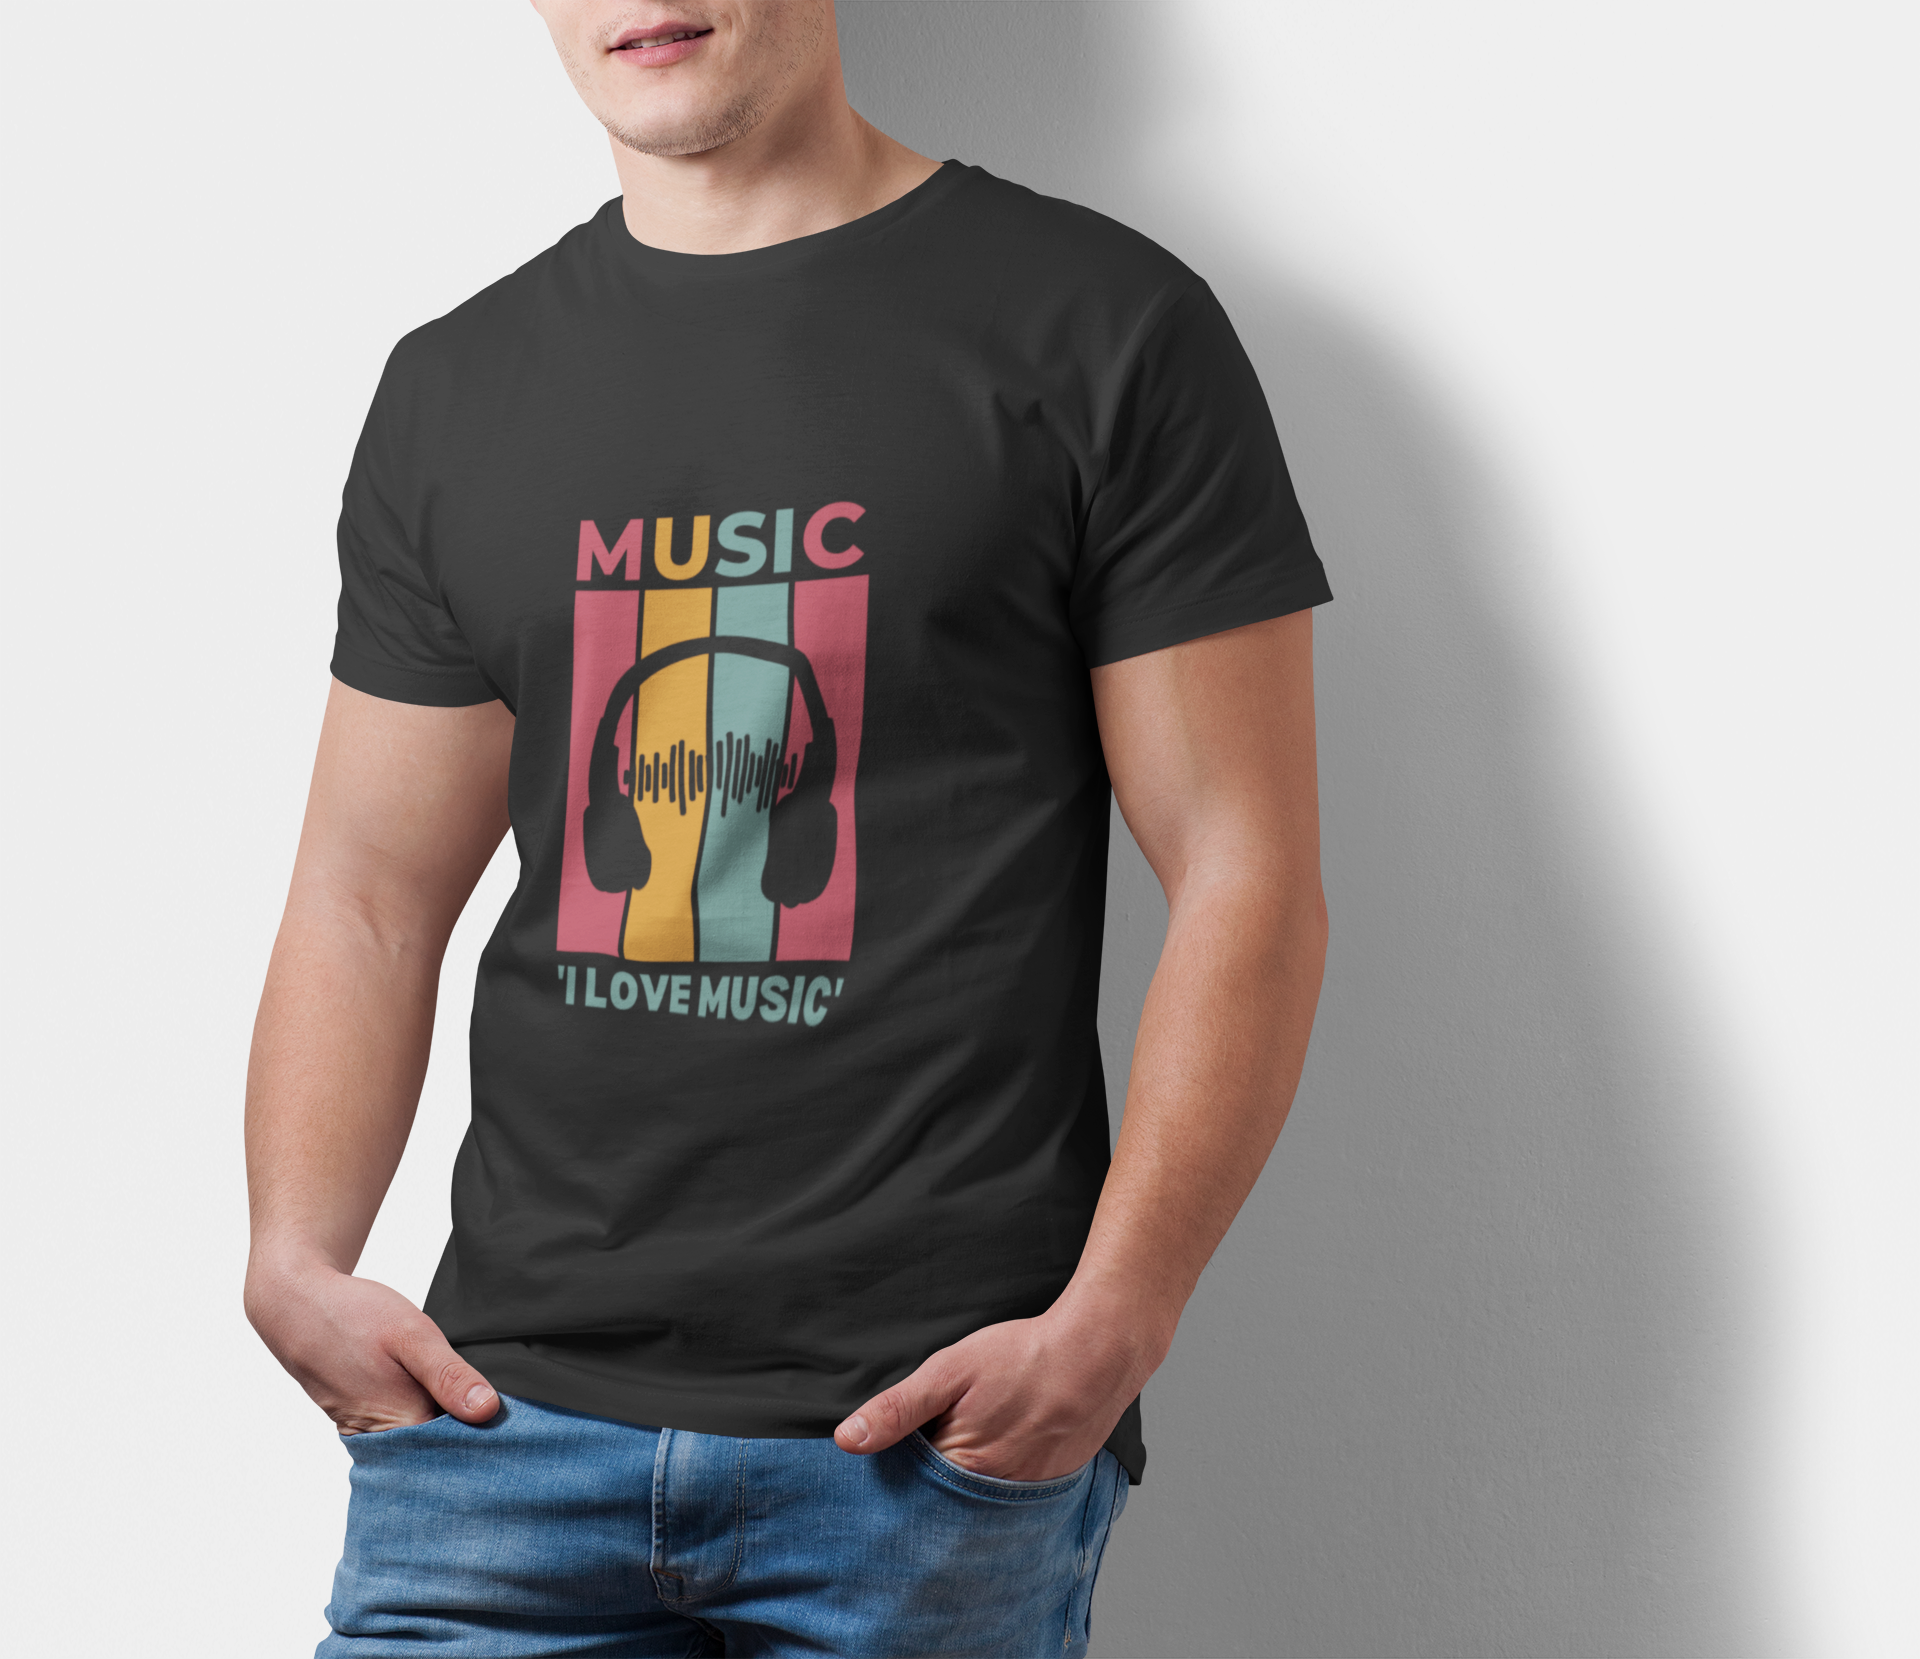 DECLARE YOUR PASSION FOR WITH OUR 'I LOVE MUSIC' T-SHIRT!